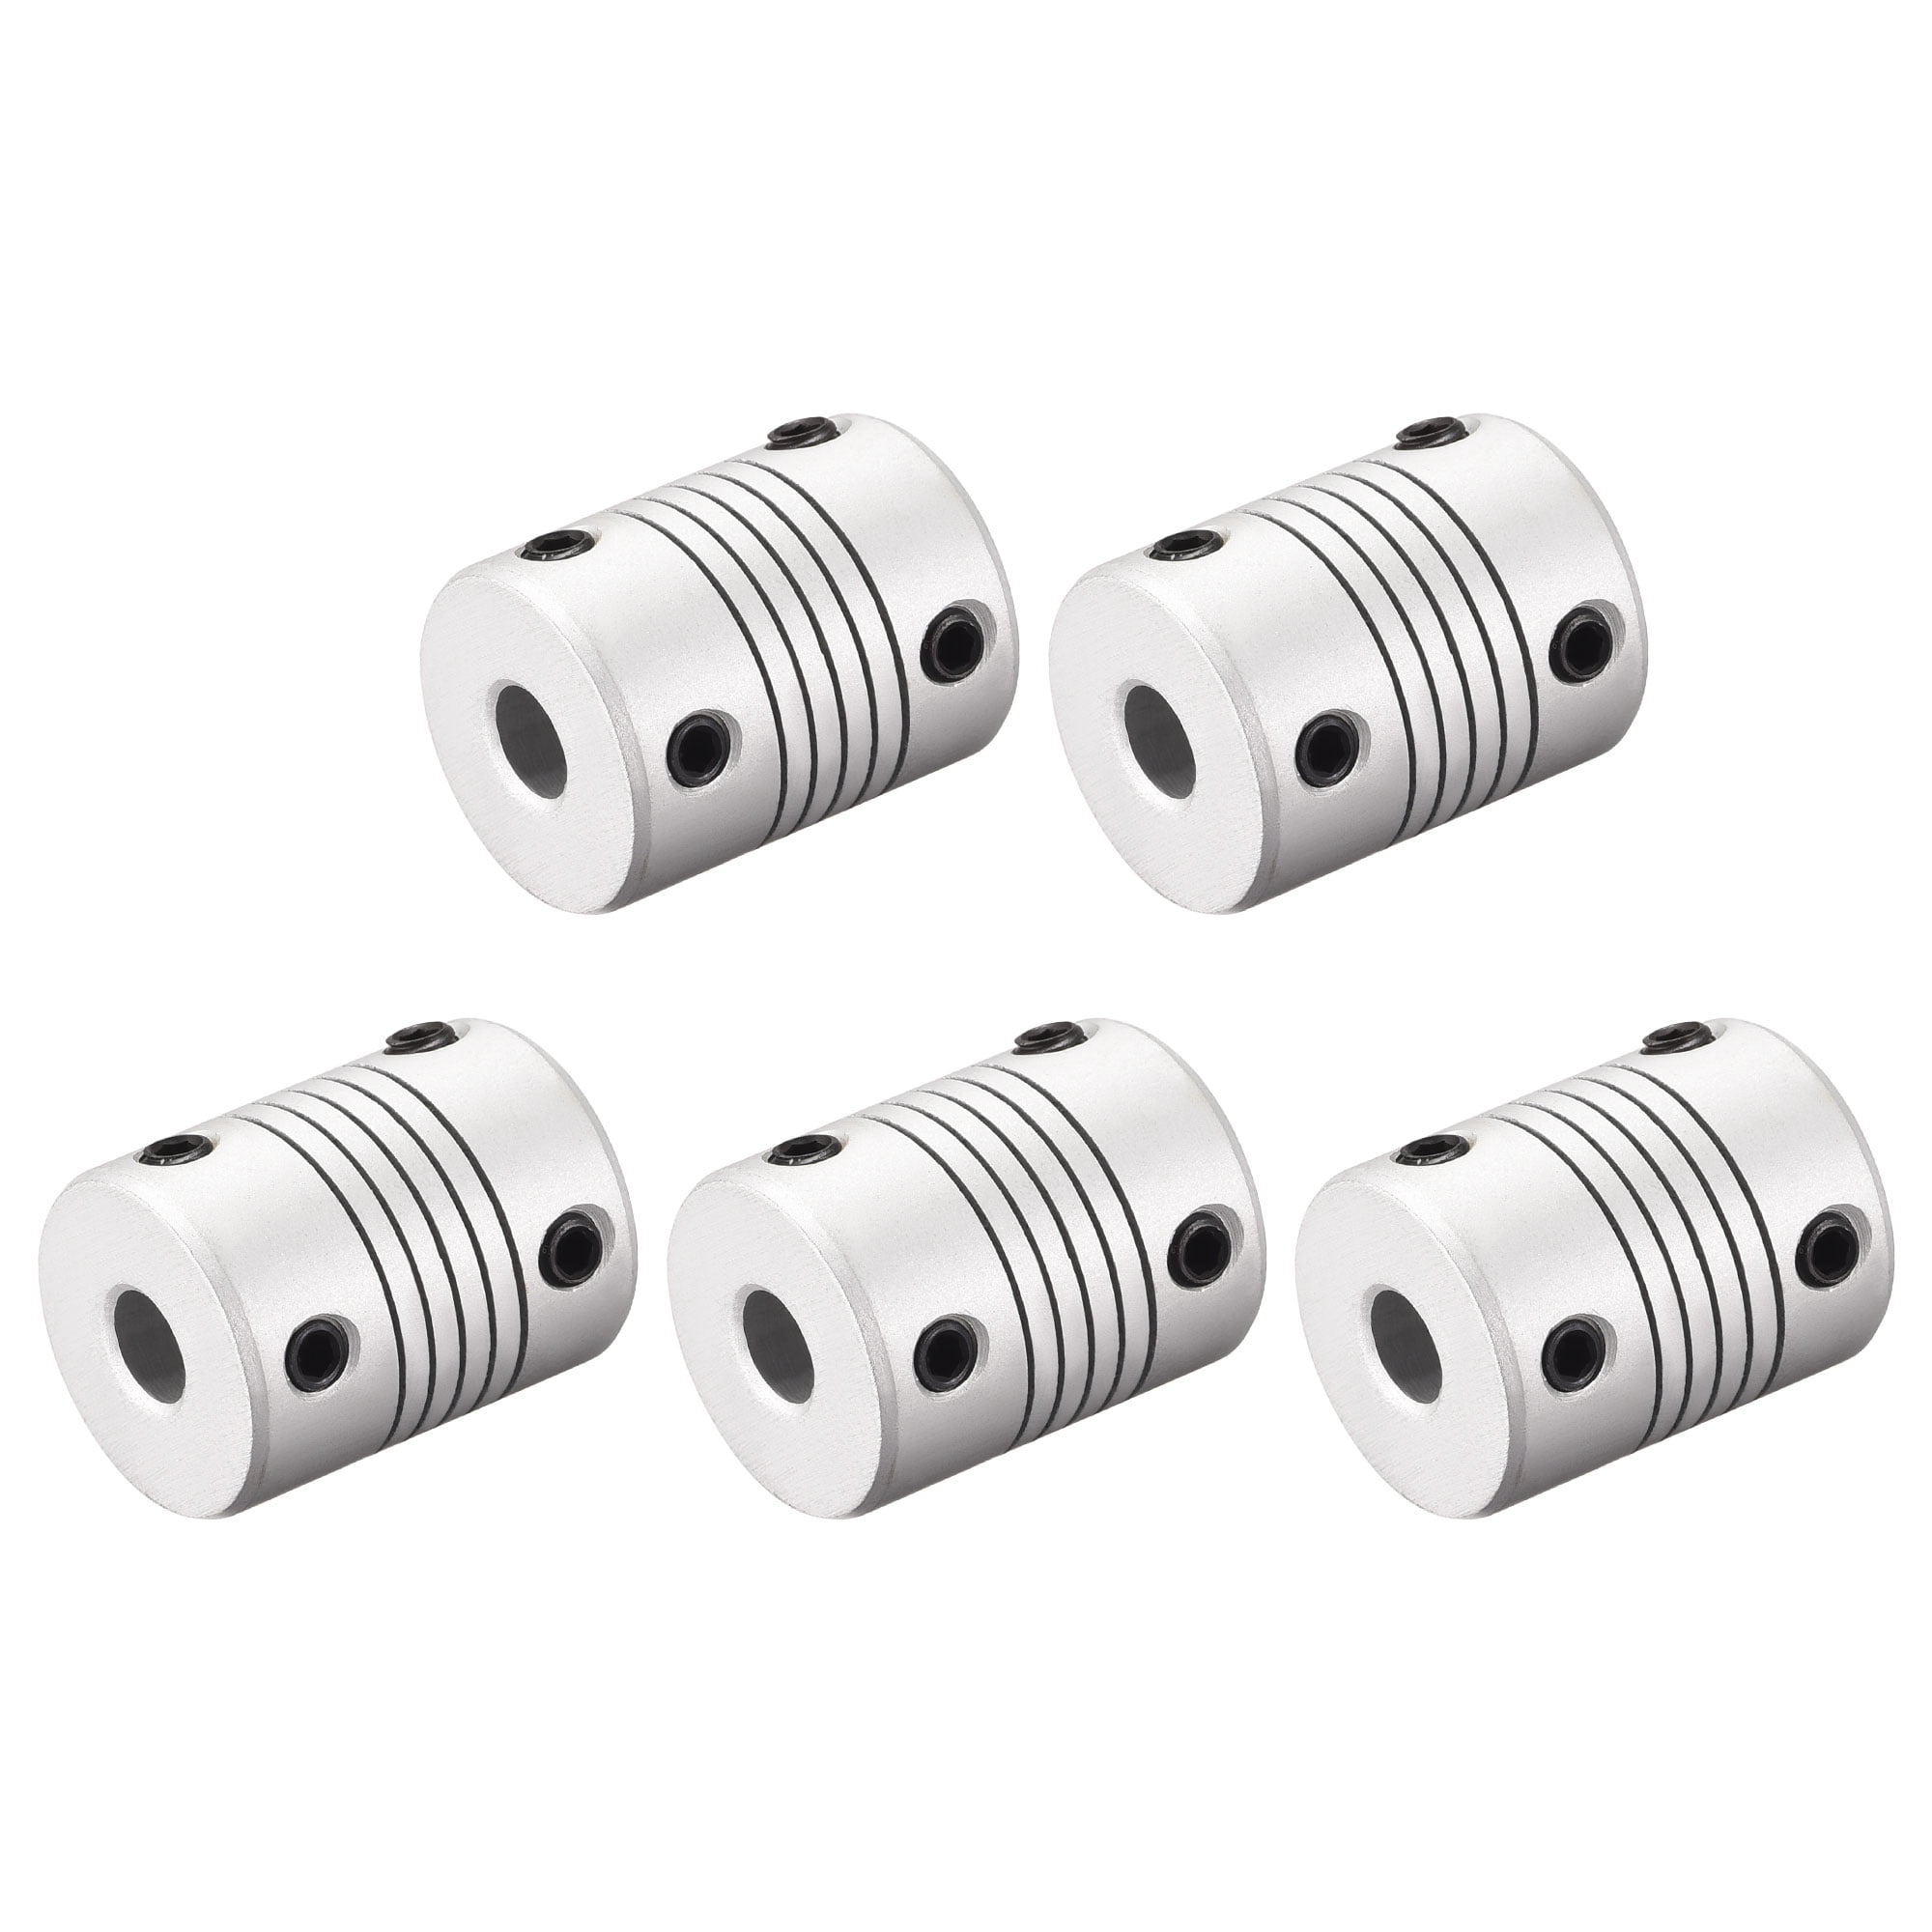 uxcell 6mm to 7mm Aluminum Alloy Shaft Coupling Flexible Coupler Motor Connector Joint L25xD19 Silver,5pcs 